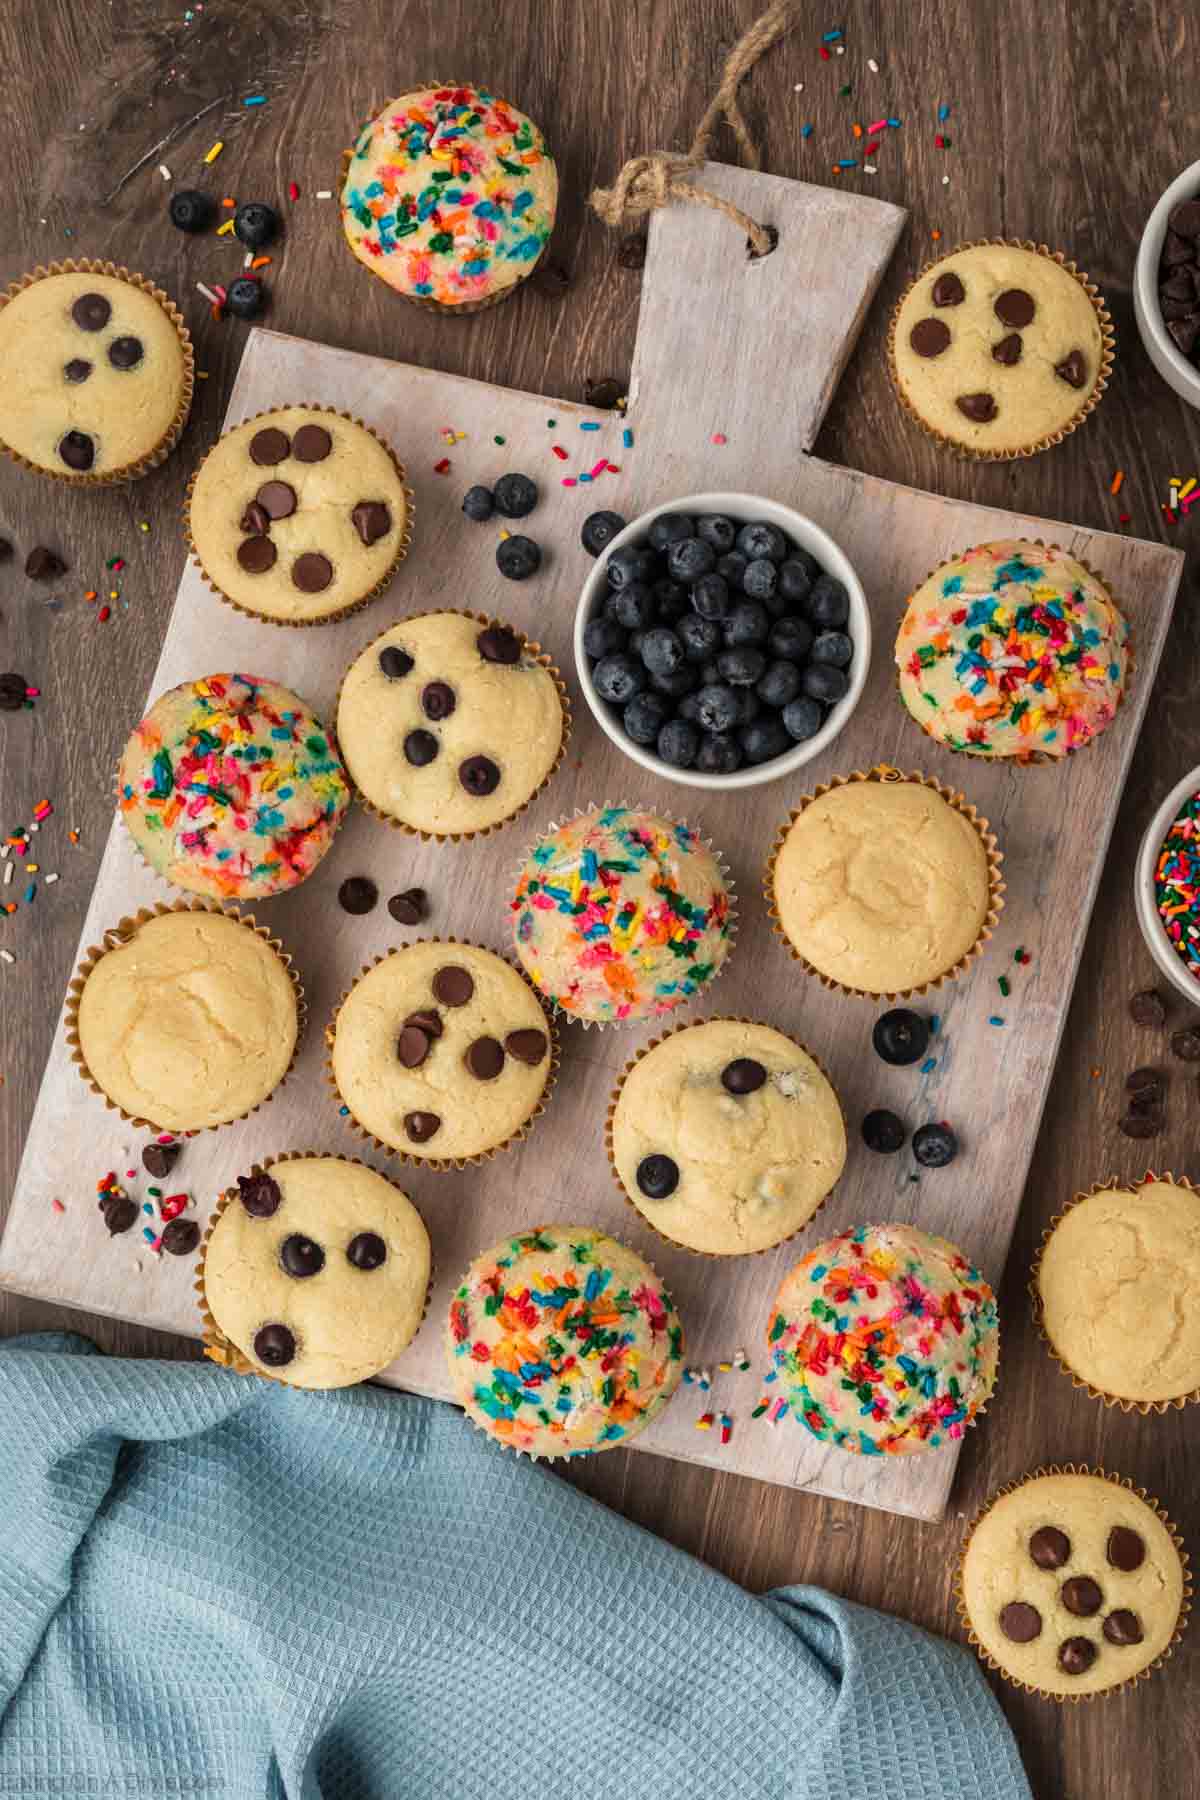 Pancake Muffins on a wooden platter. There are muffins with chocolate chips and sprinkles with a bowl of blueberries